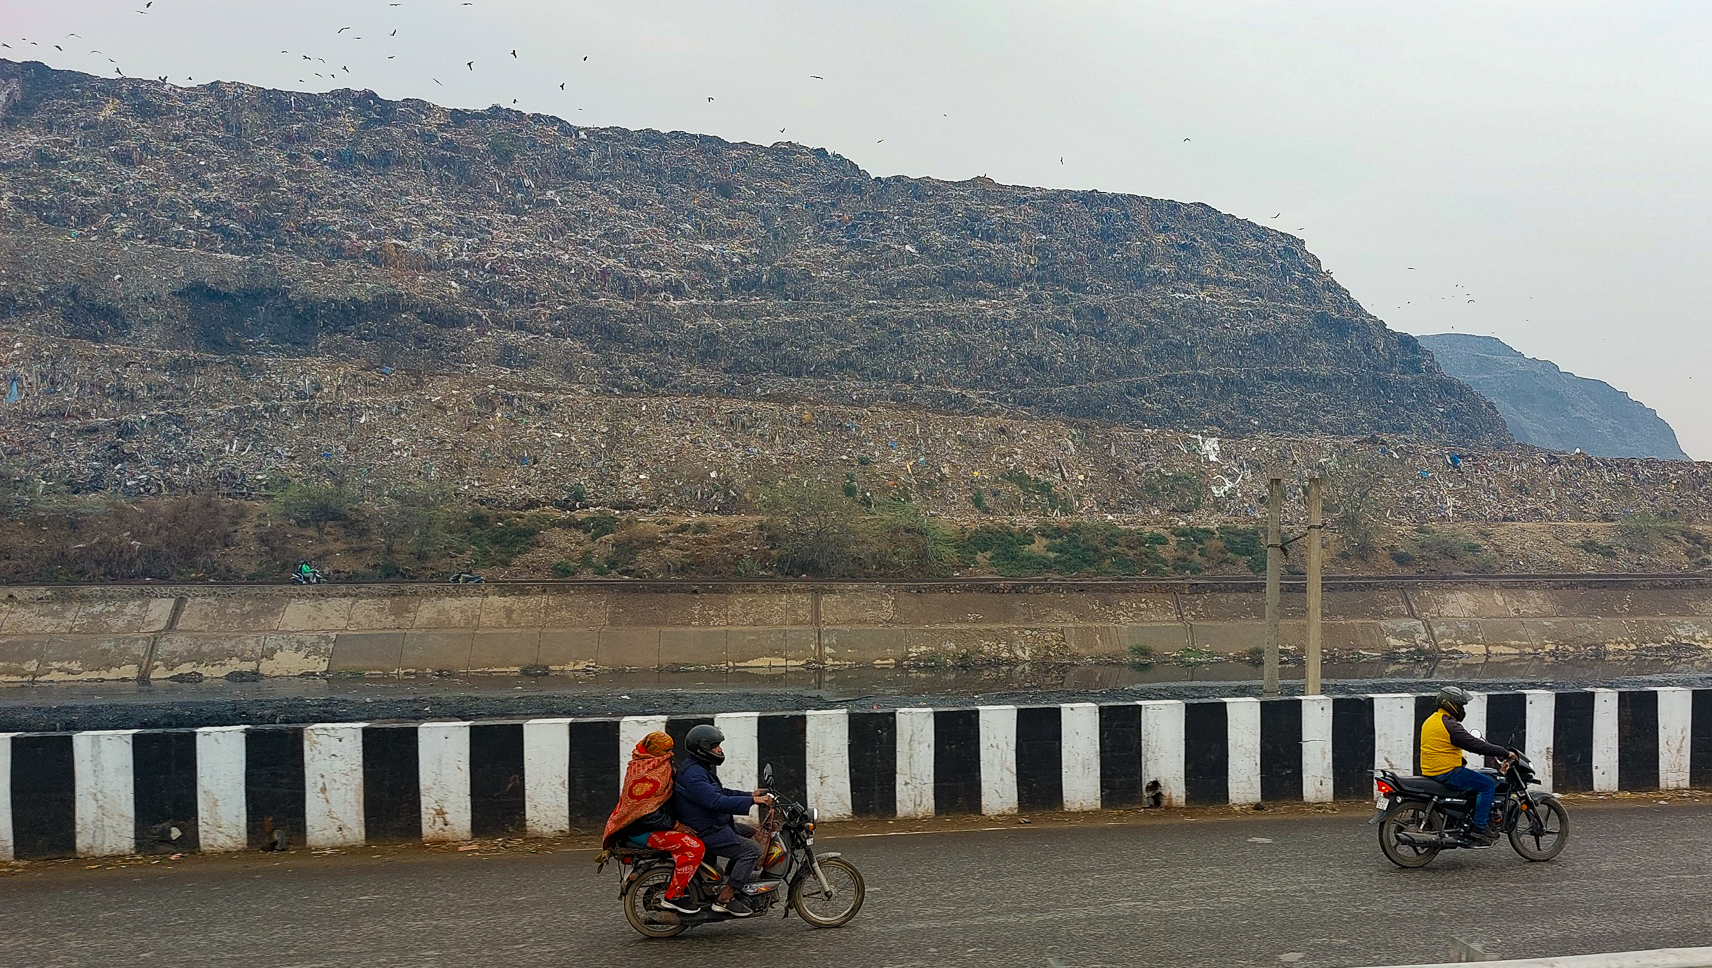 <span  class="uc_style_uc_tiles_grid_image_elementor_uc_items_attribute_title" style="color:#ffffff;">arriving to New Delhi: this is the biggest, most stinking waste disposal site we ever saw</span>